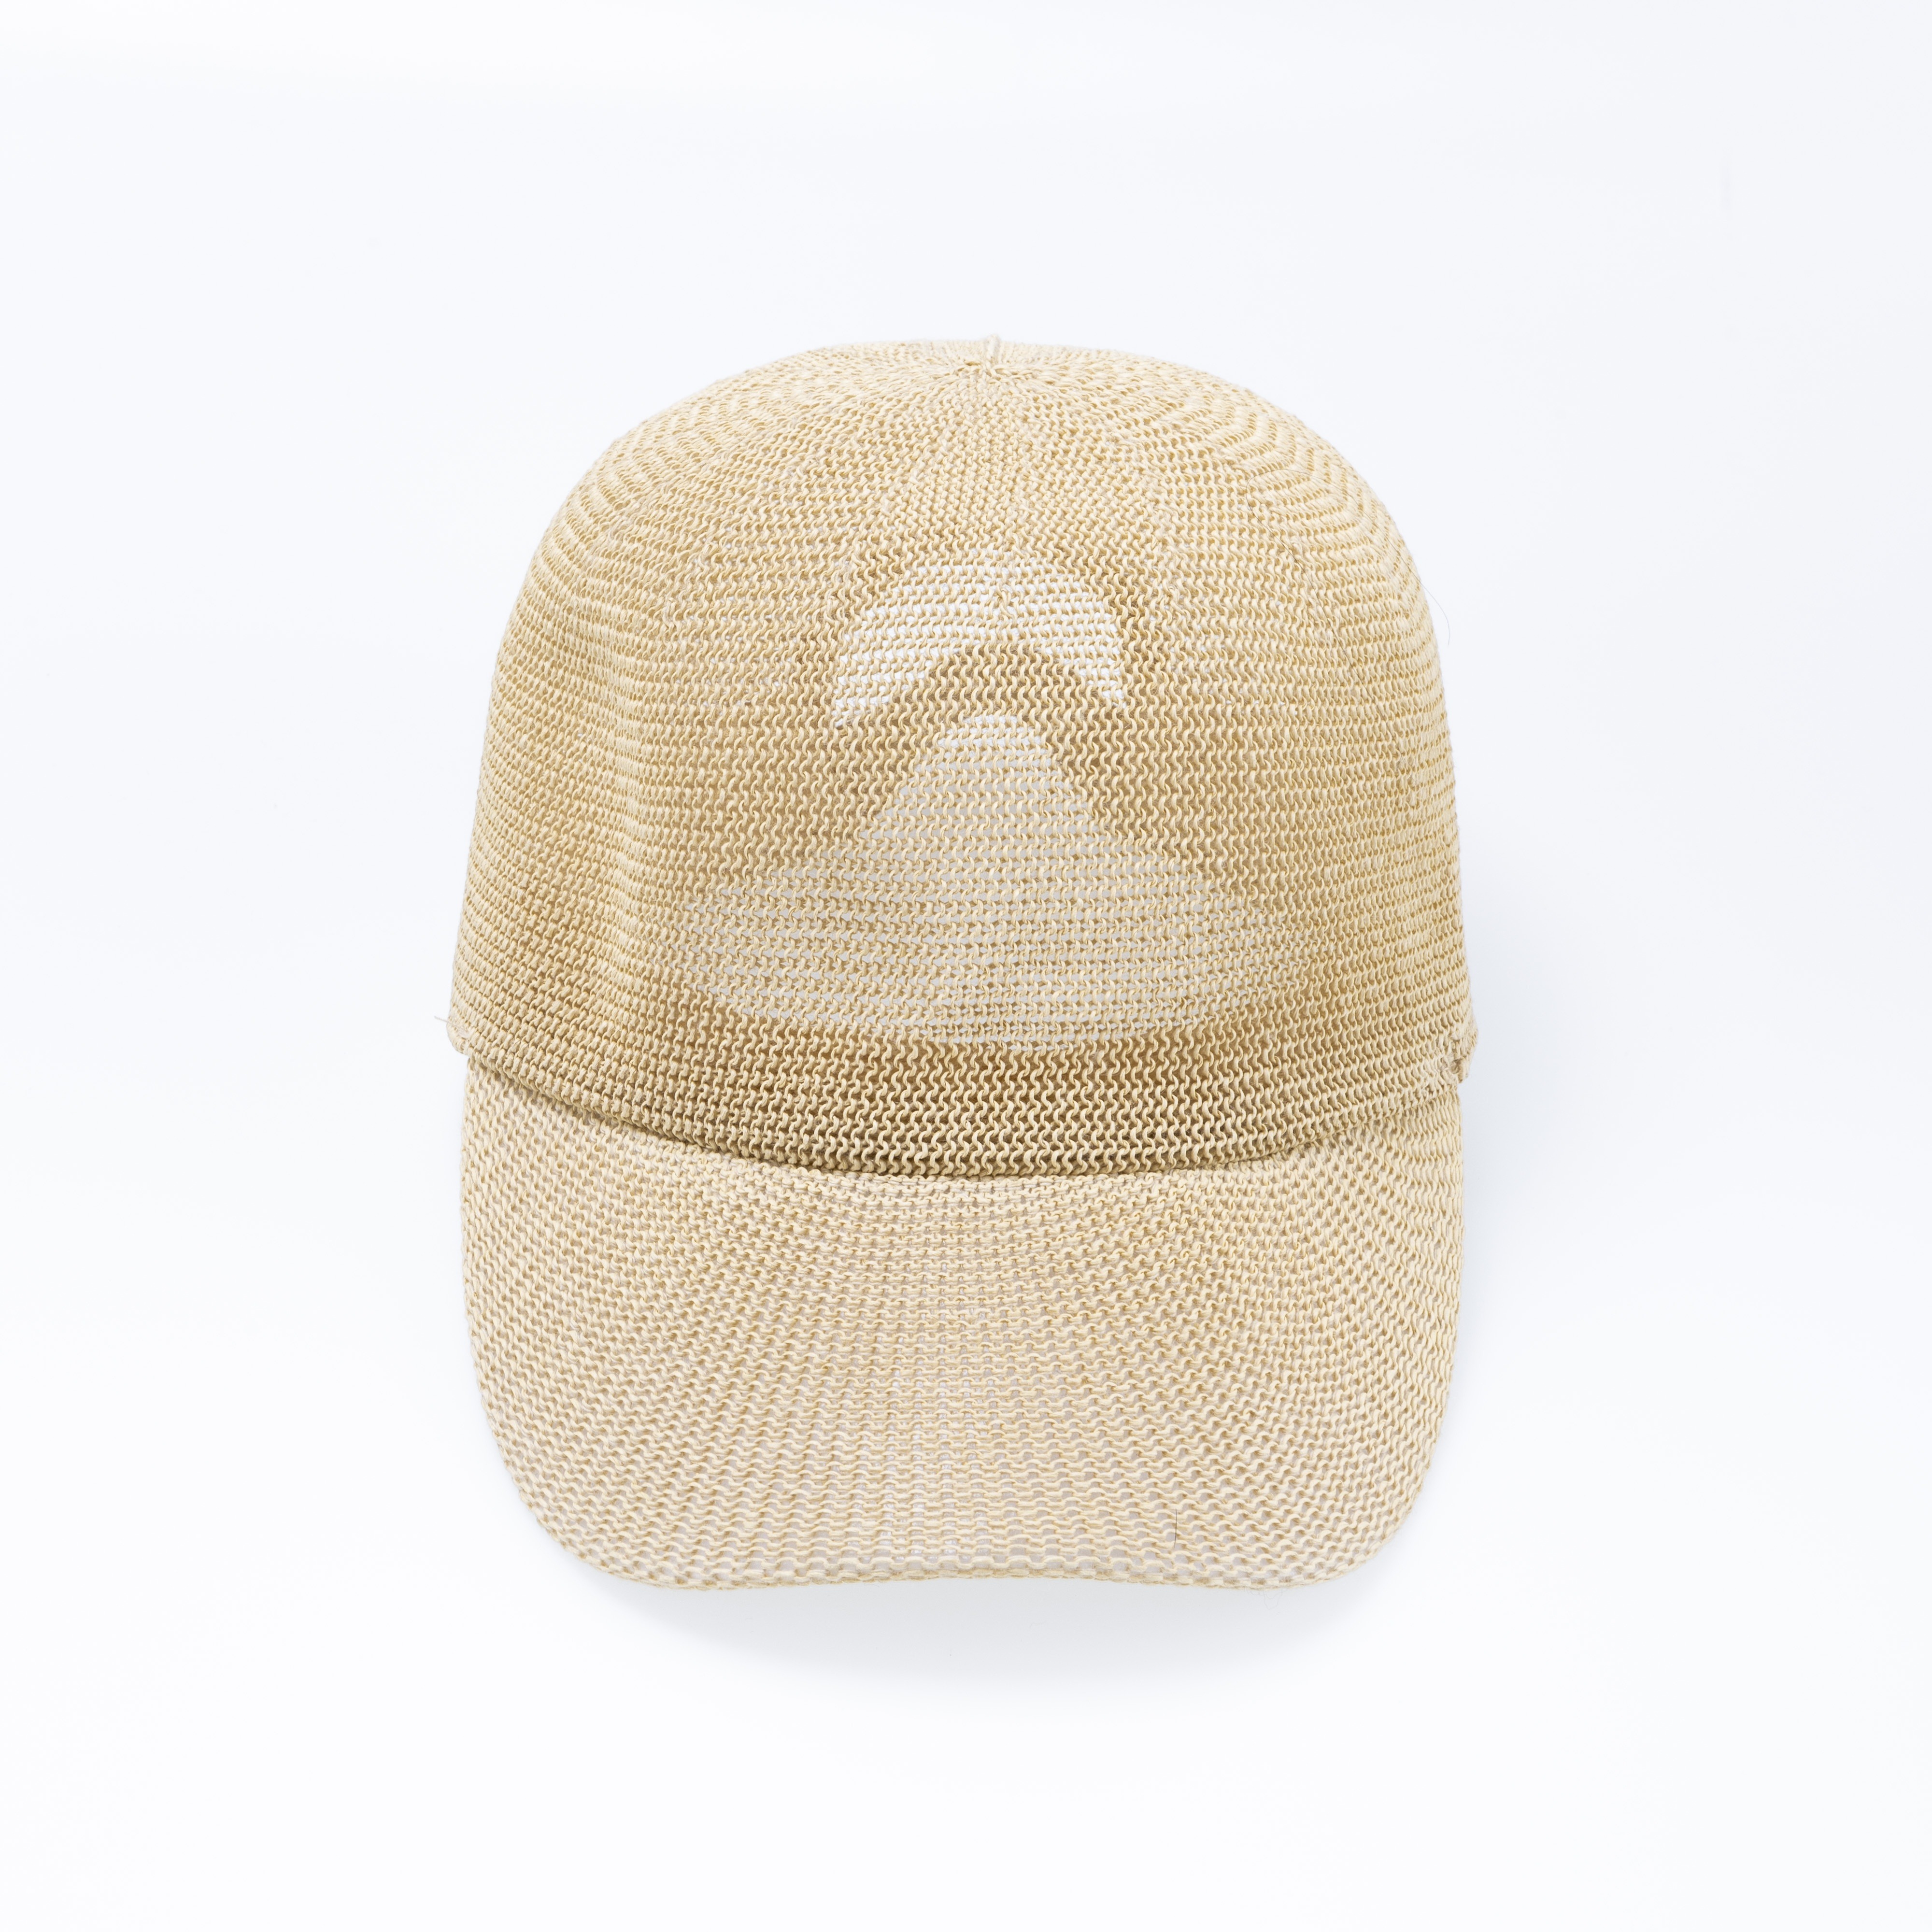 

Breathable Straw Baseball Cap For Women, Spring/summer/autumn Adjustable Peaked Cap, Casual Sun Hat With Uv Protection